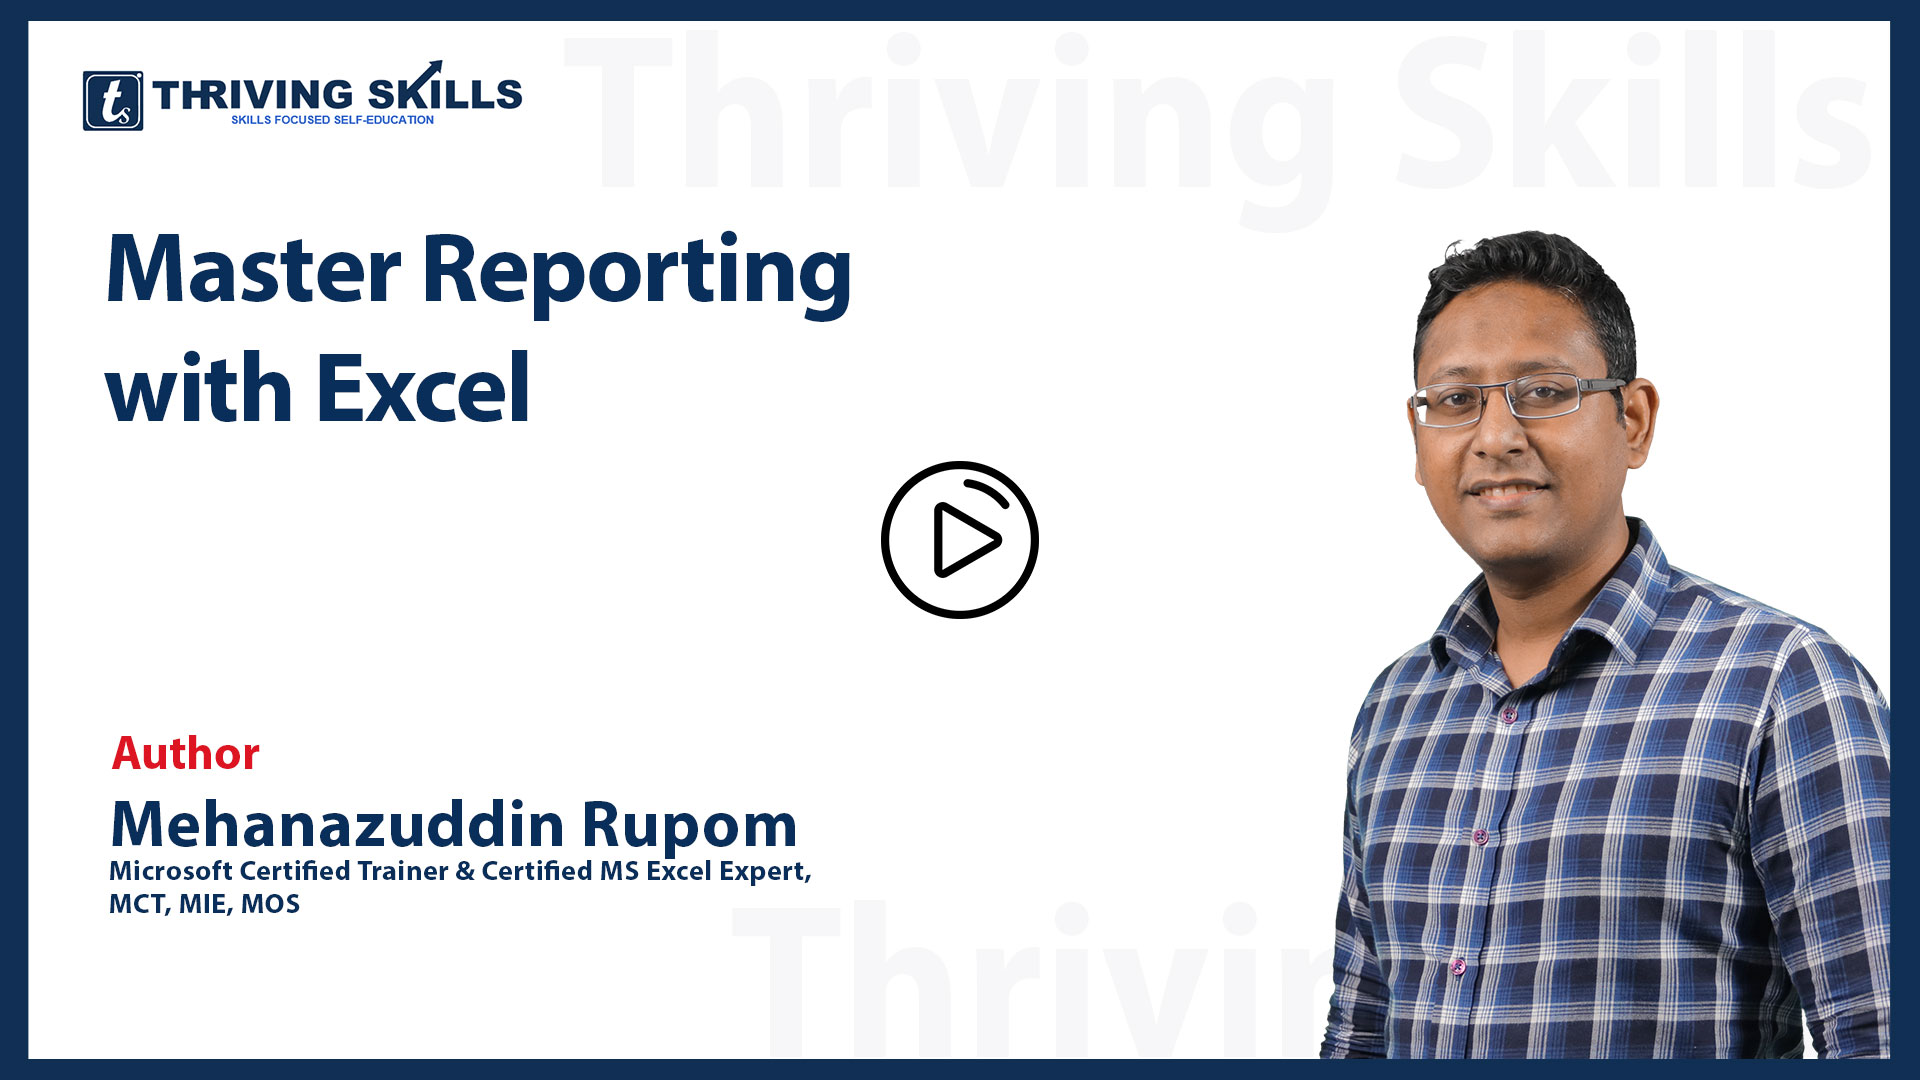 Master reporting with Excel